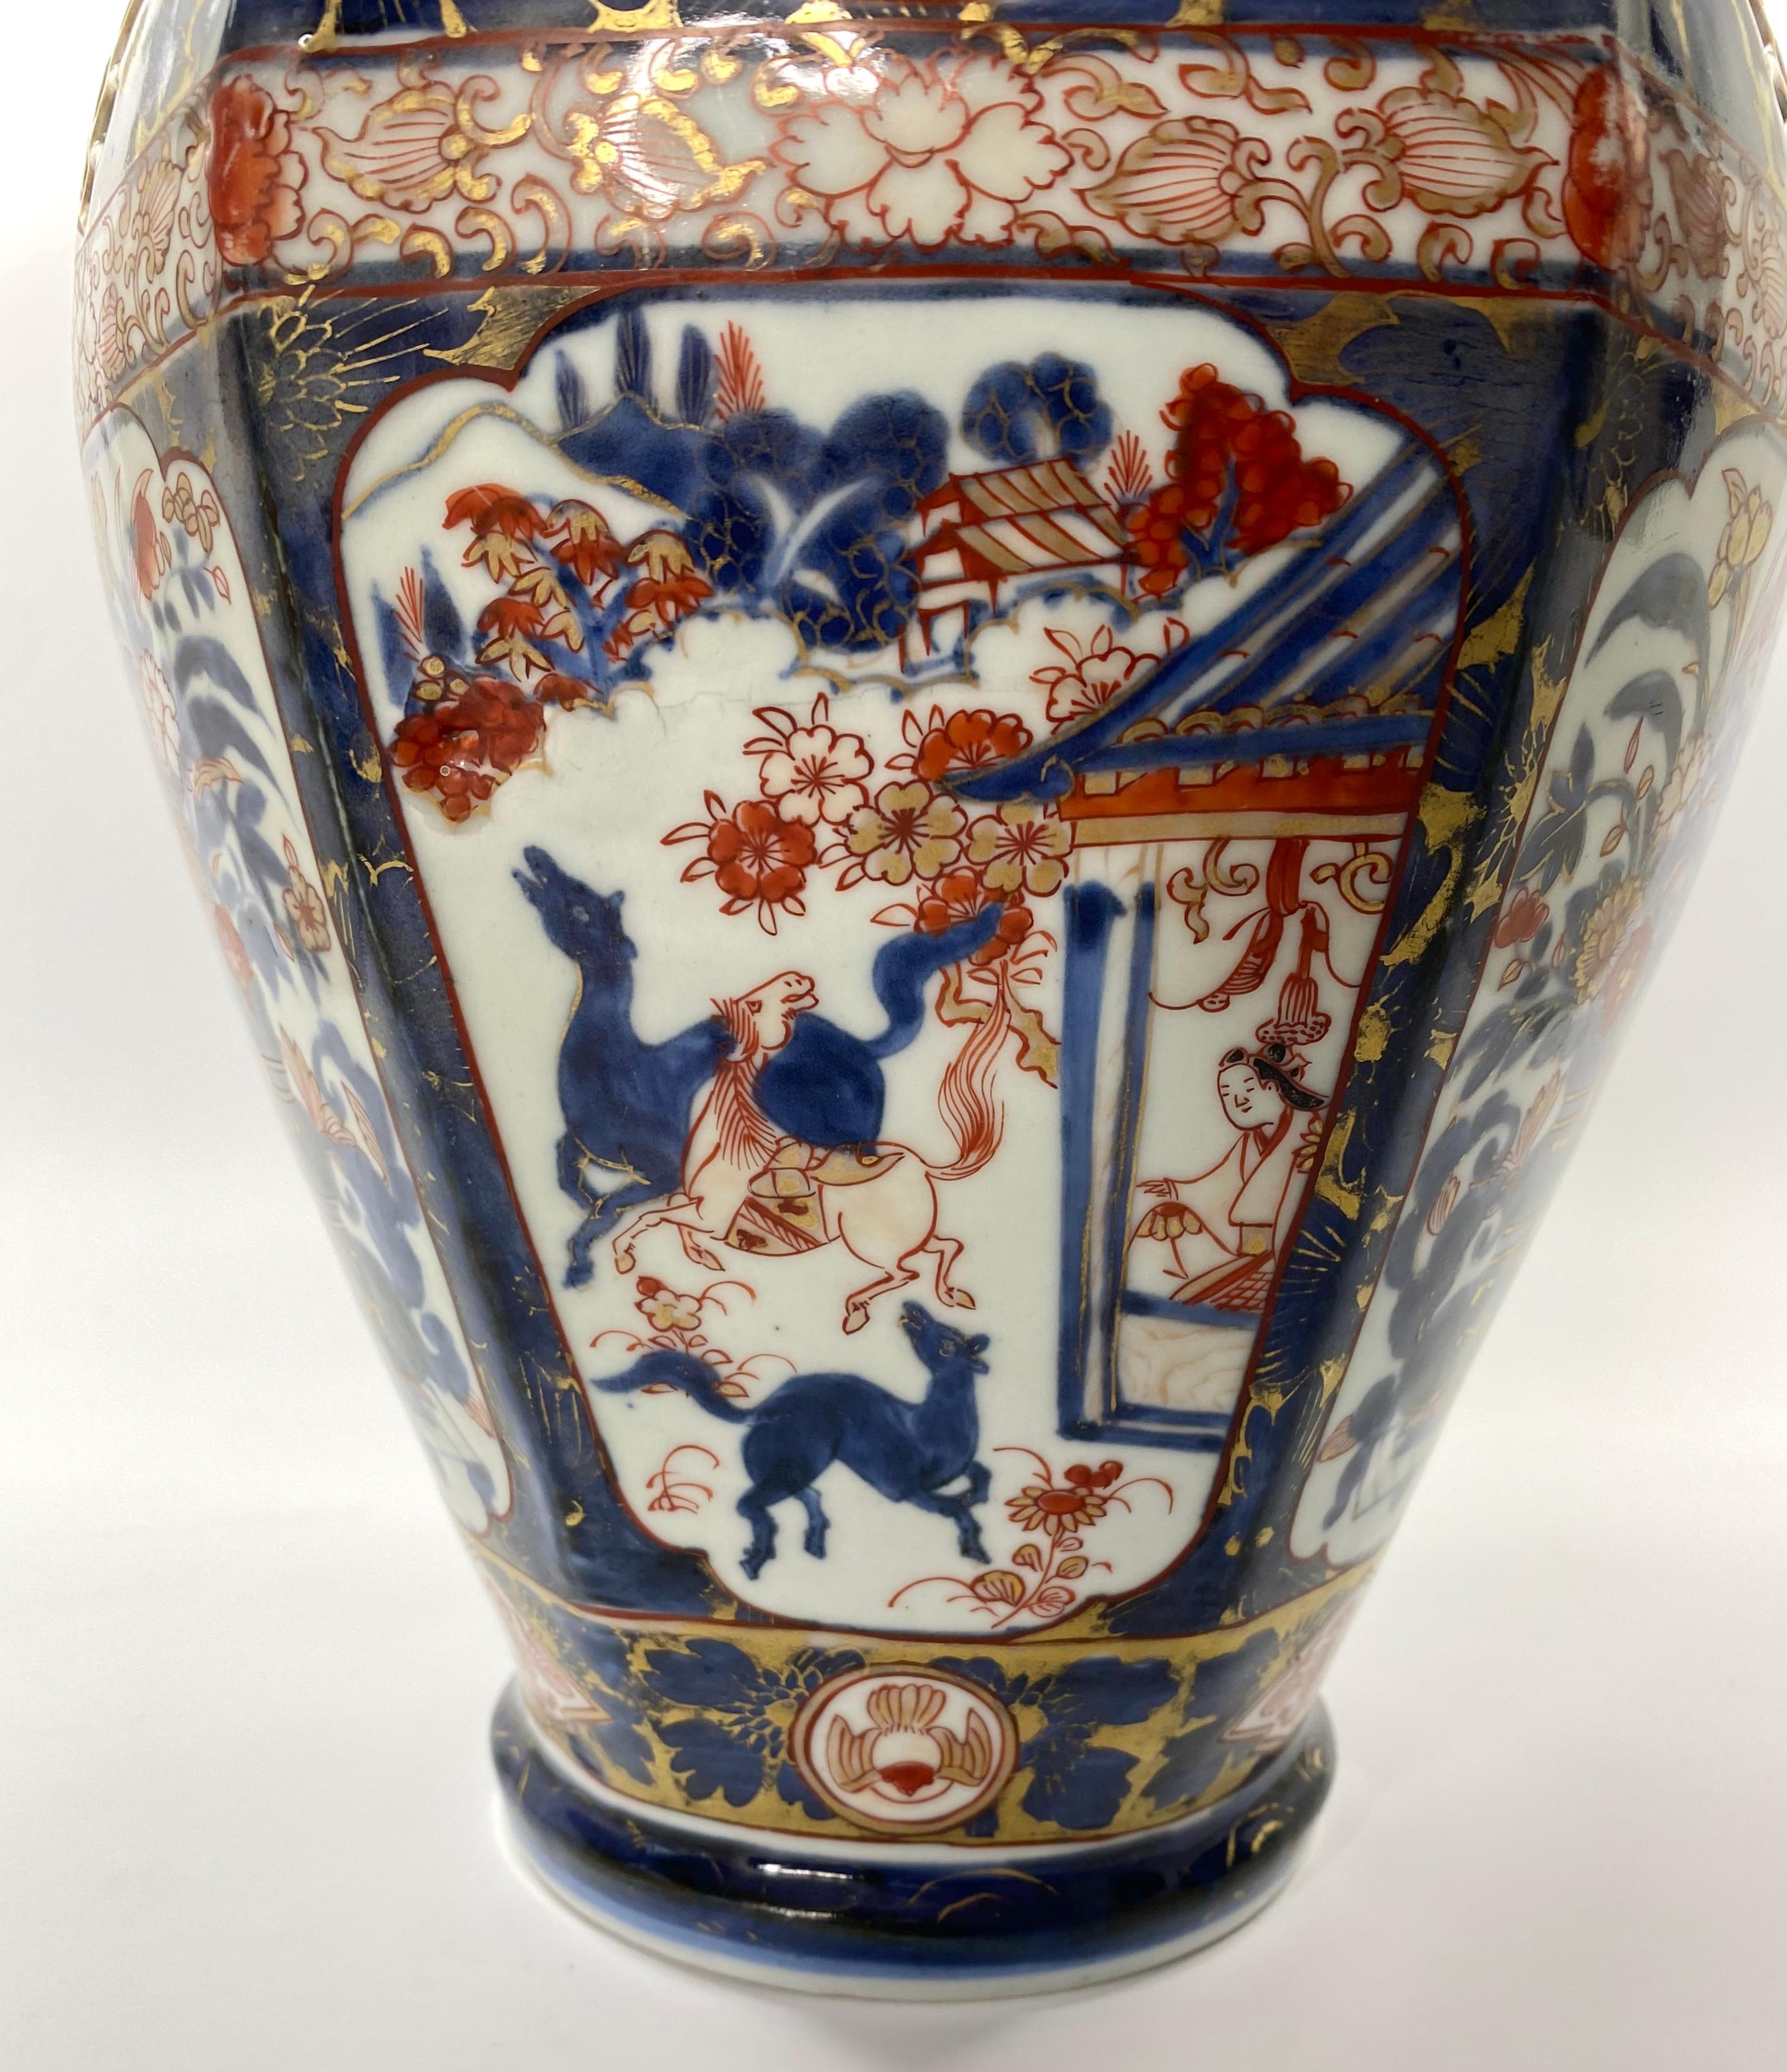 Japanese ‘Imari’ porcelain vase, Arita, c.1700. Edo Period. The hexagonal shaped vase, hand painted with panels of a bijin watching horses playing before a pavilion, in a landscape, alternating with panels of jardinieres containing flowering